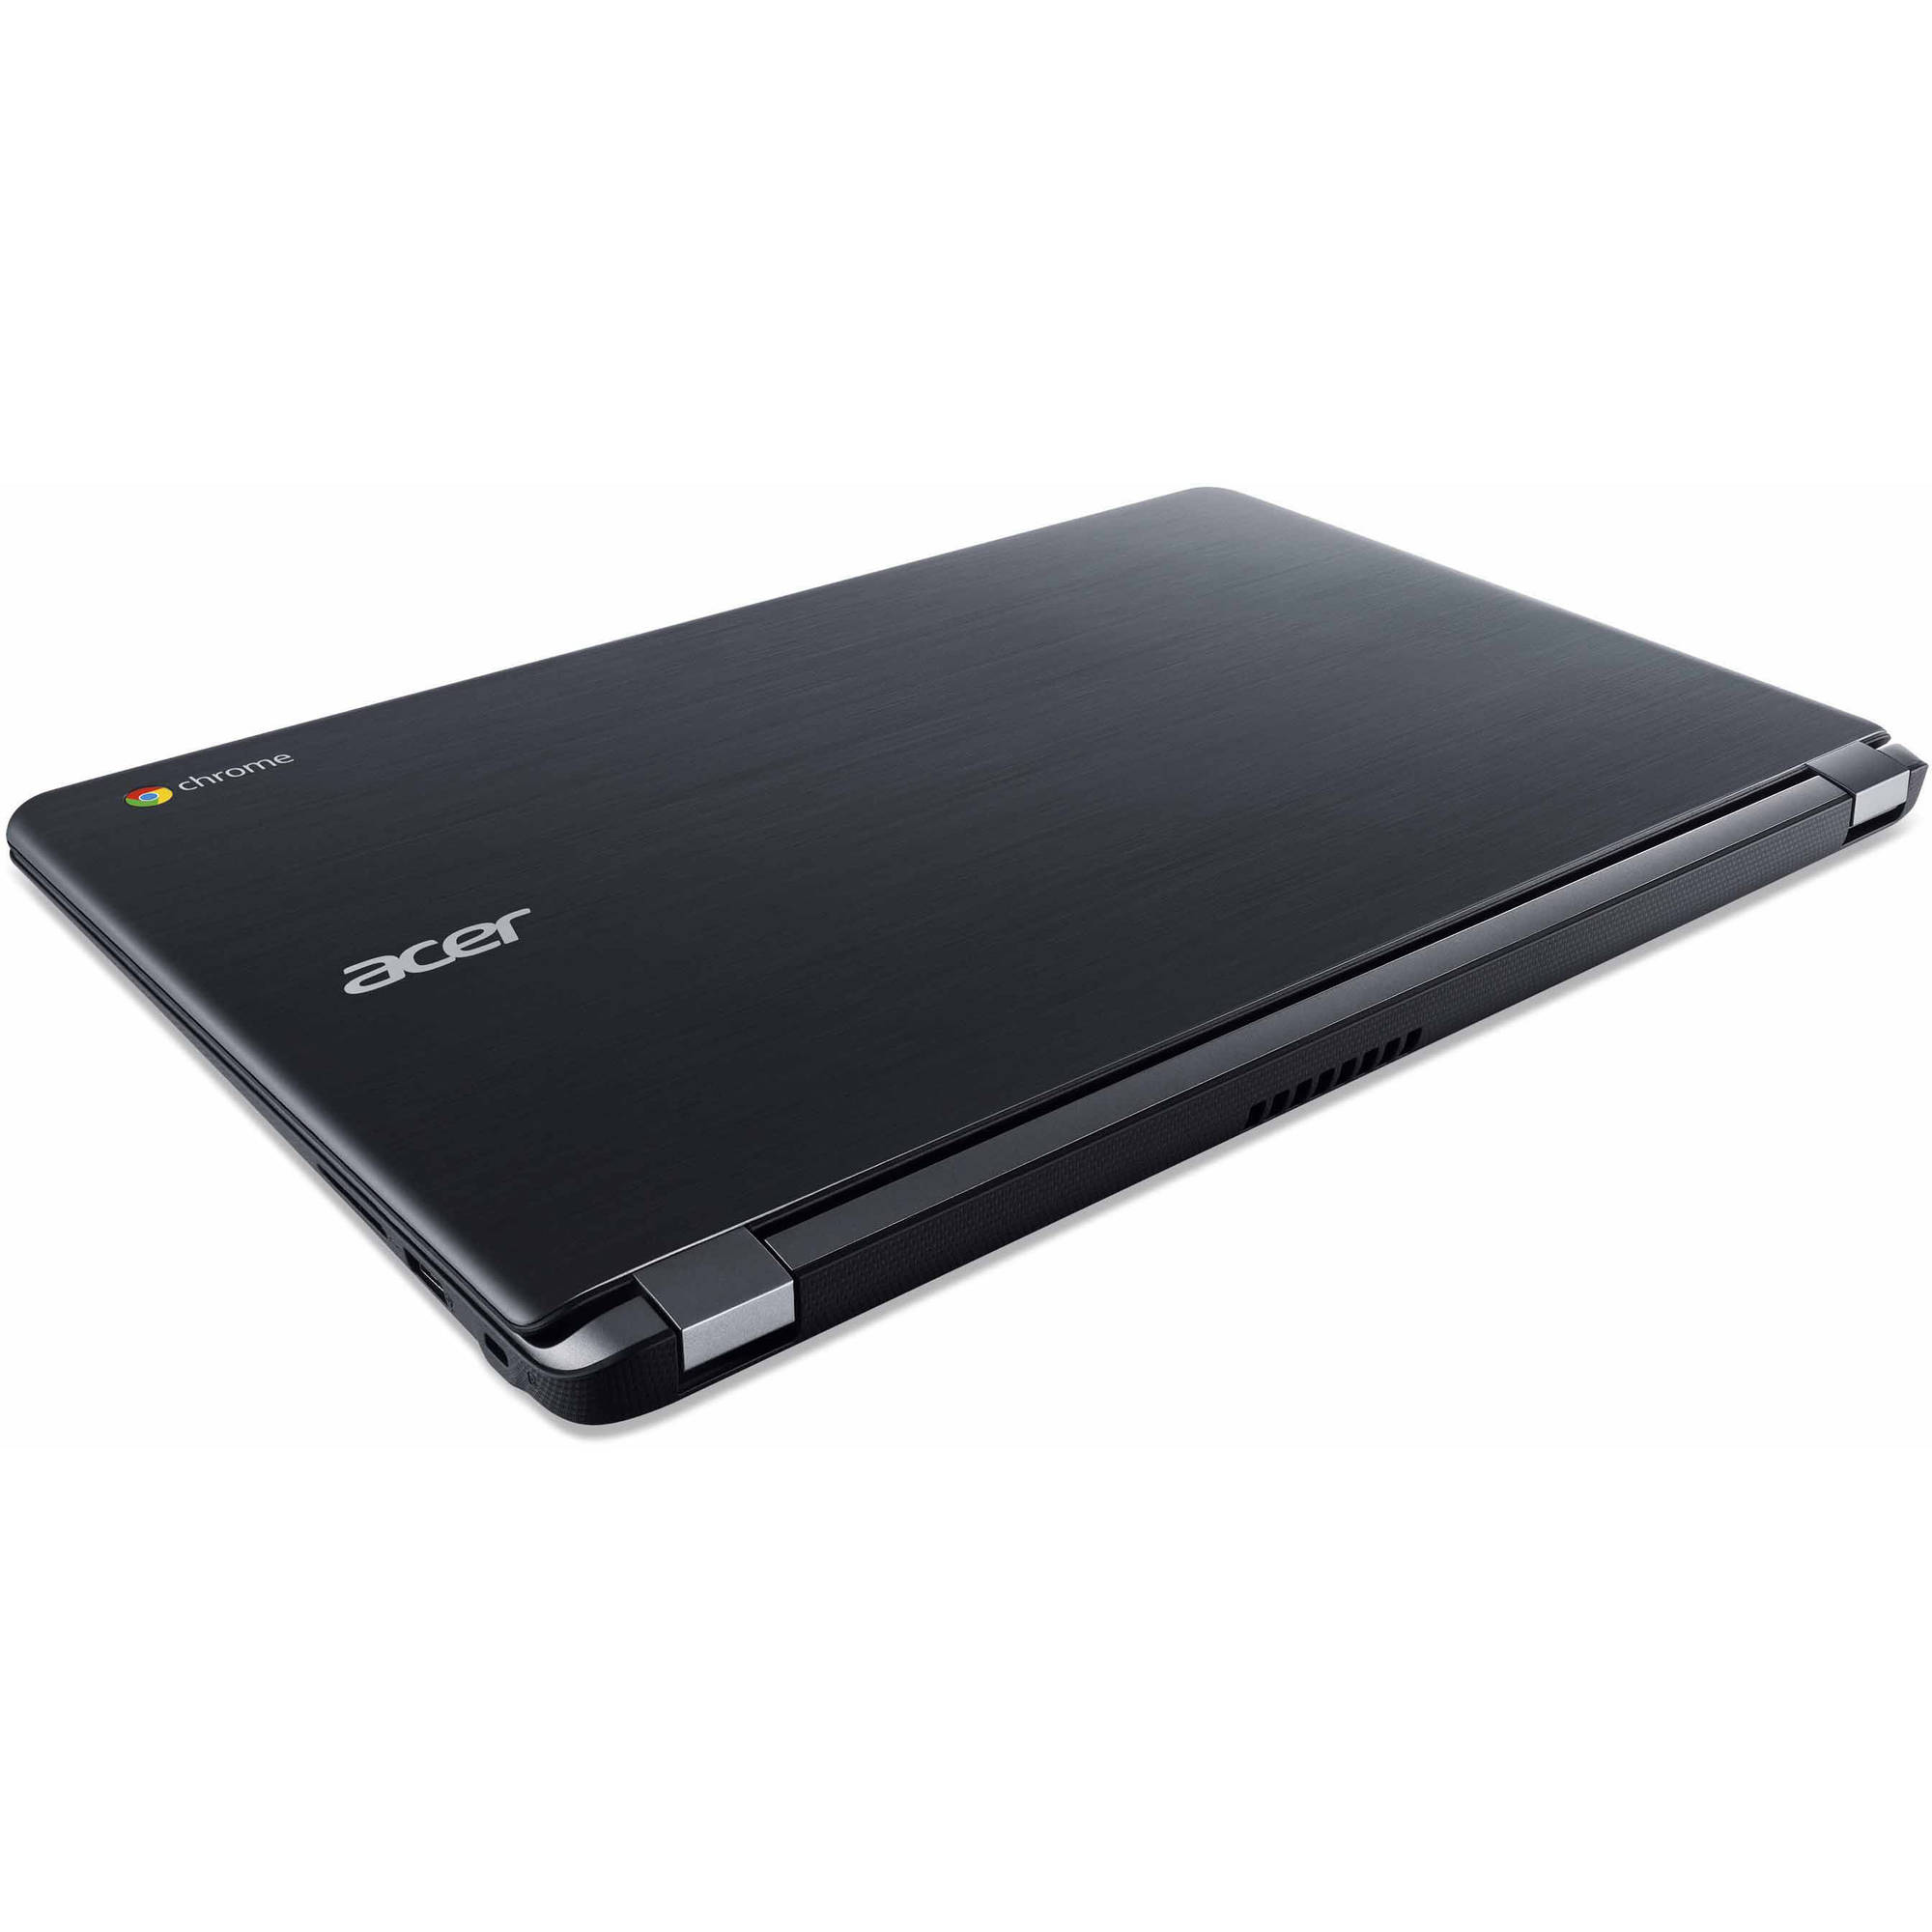 Acer Granite Gray 15.6" CB3-531-C4A5 Chromebook PC with Intel Celeron N2830 Dual-Core Processor, 2GB Memory, 16GB Hard Drive and Chrome OS - image 4 of 9